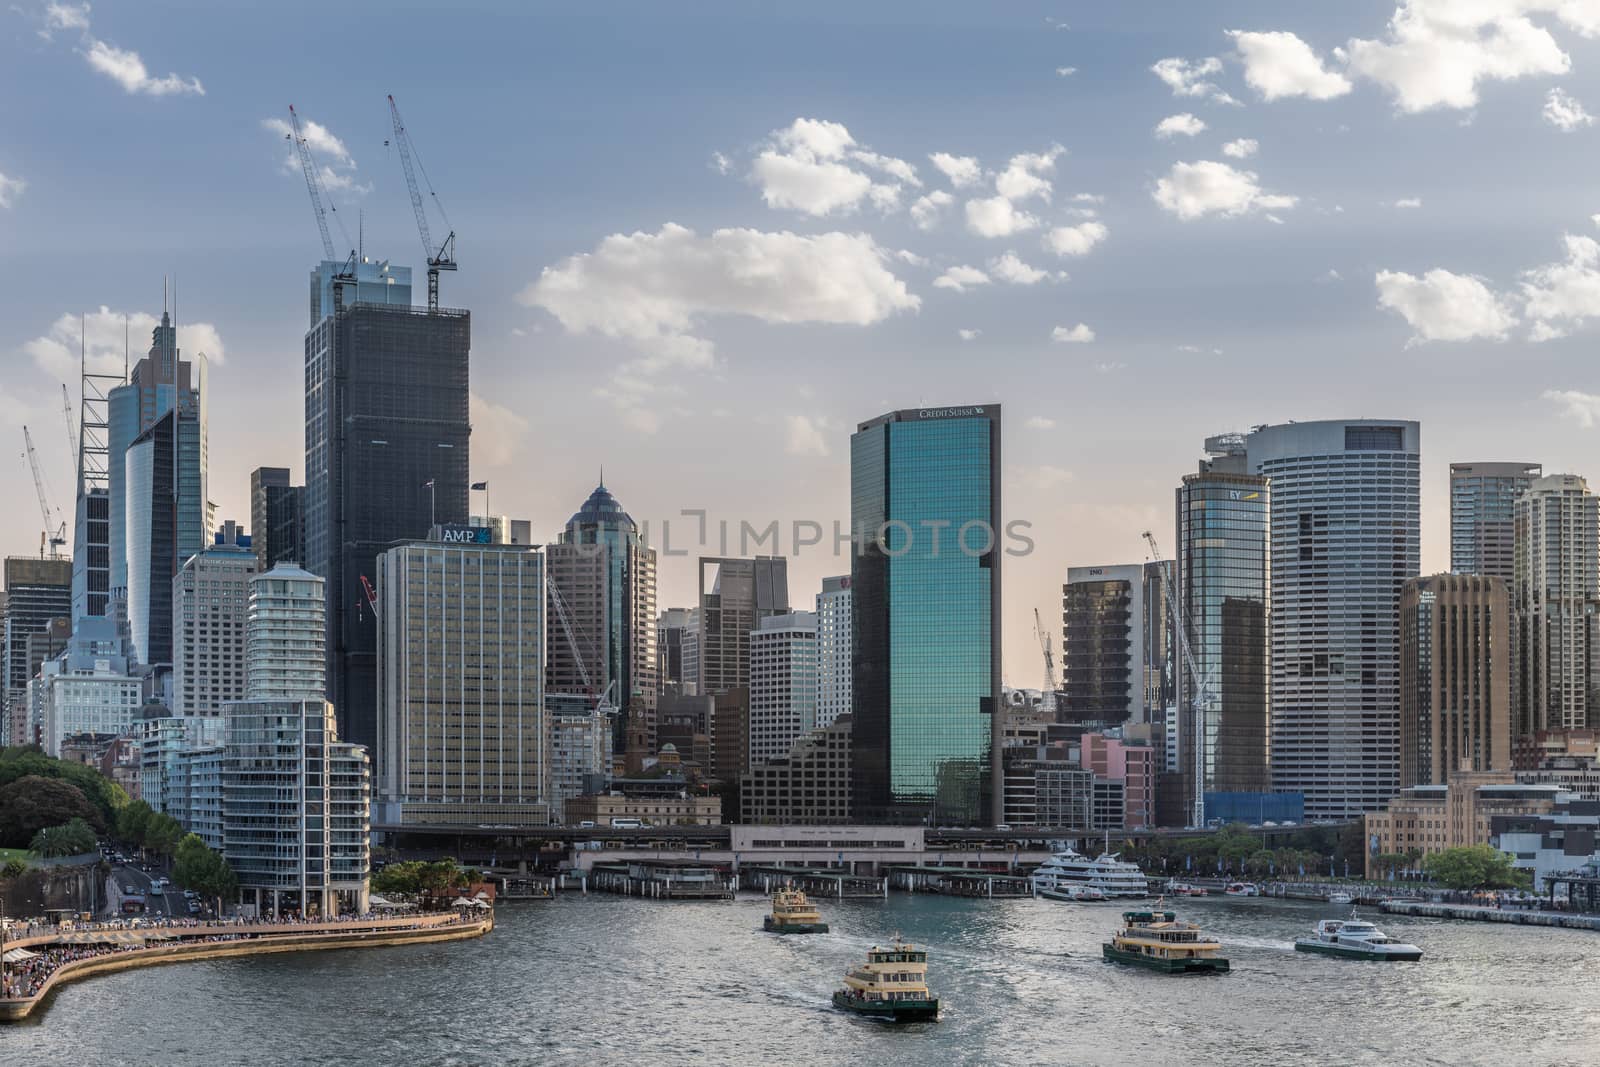 Sydney, Australia - February 12, 2019: Wide shot of Ferry terminal and Circular Quay Railway Station plus skyline in back. Highrises under construction with cranes. Evening shot with light blue sky.